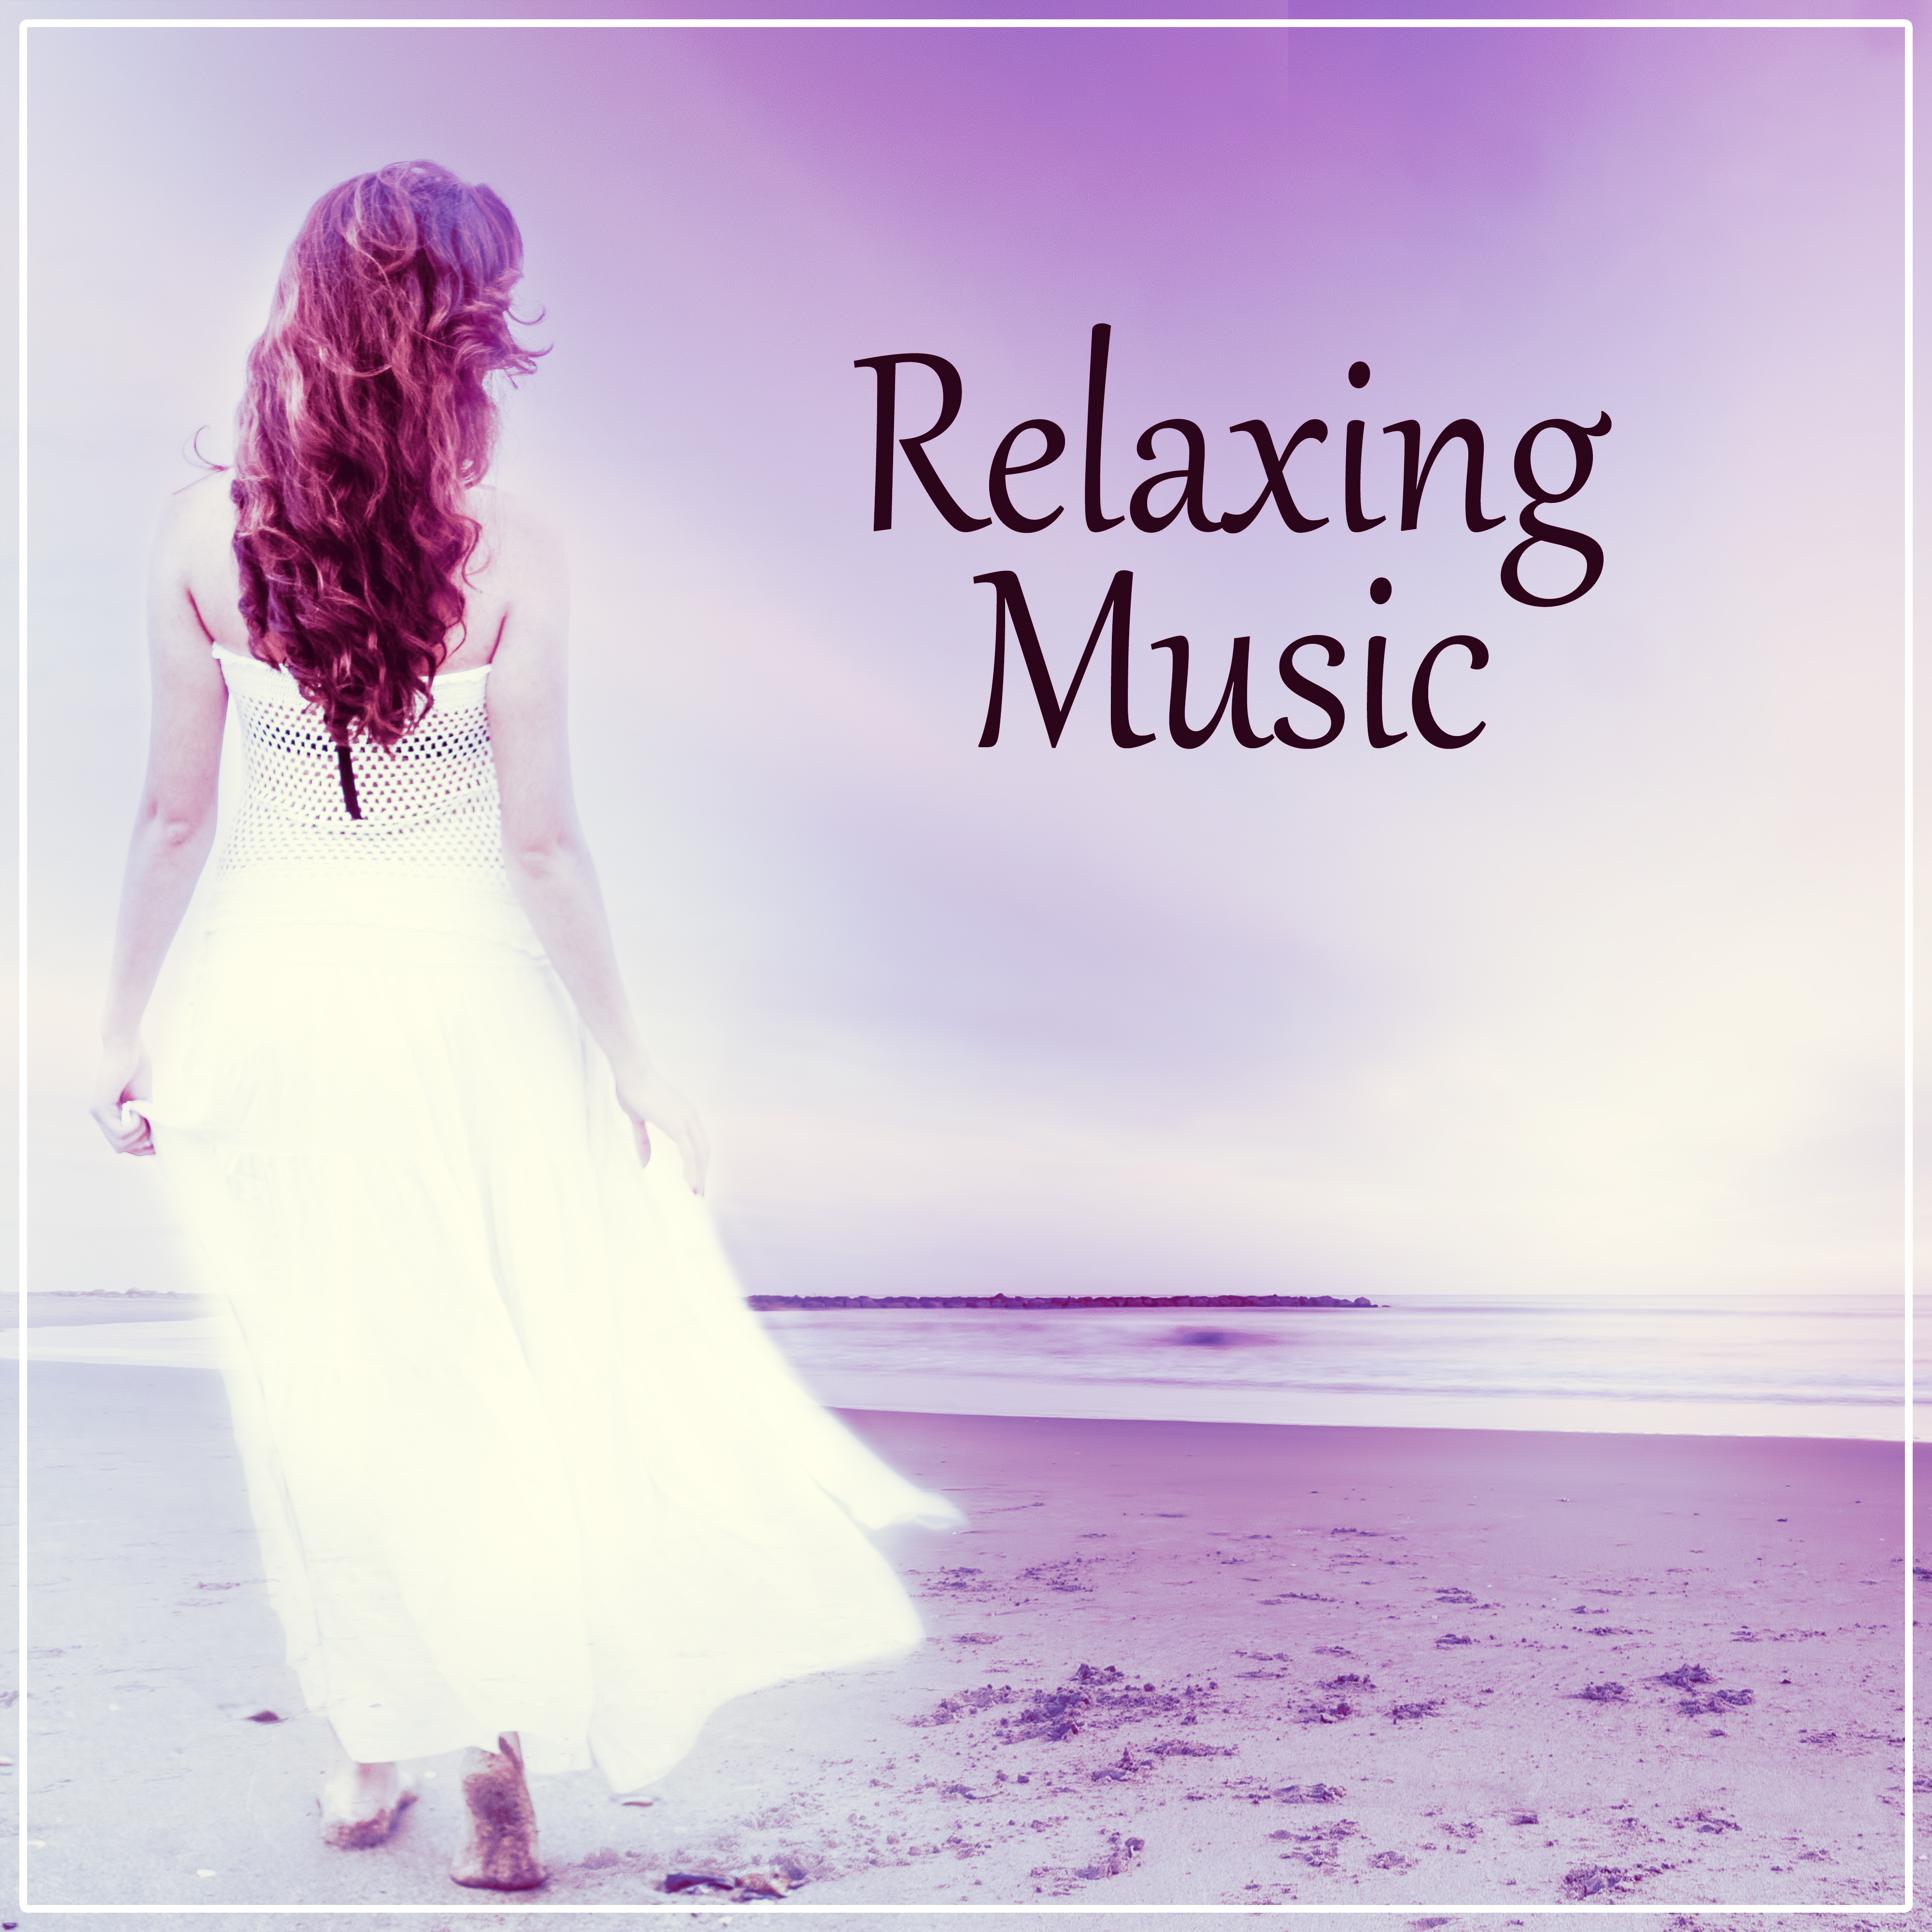 Relaxing Music - Focus on Learning, Time for Study, Effective Working, Music for Concentration